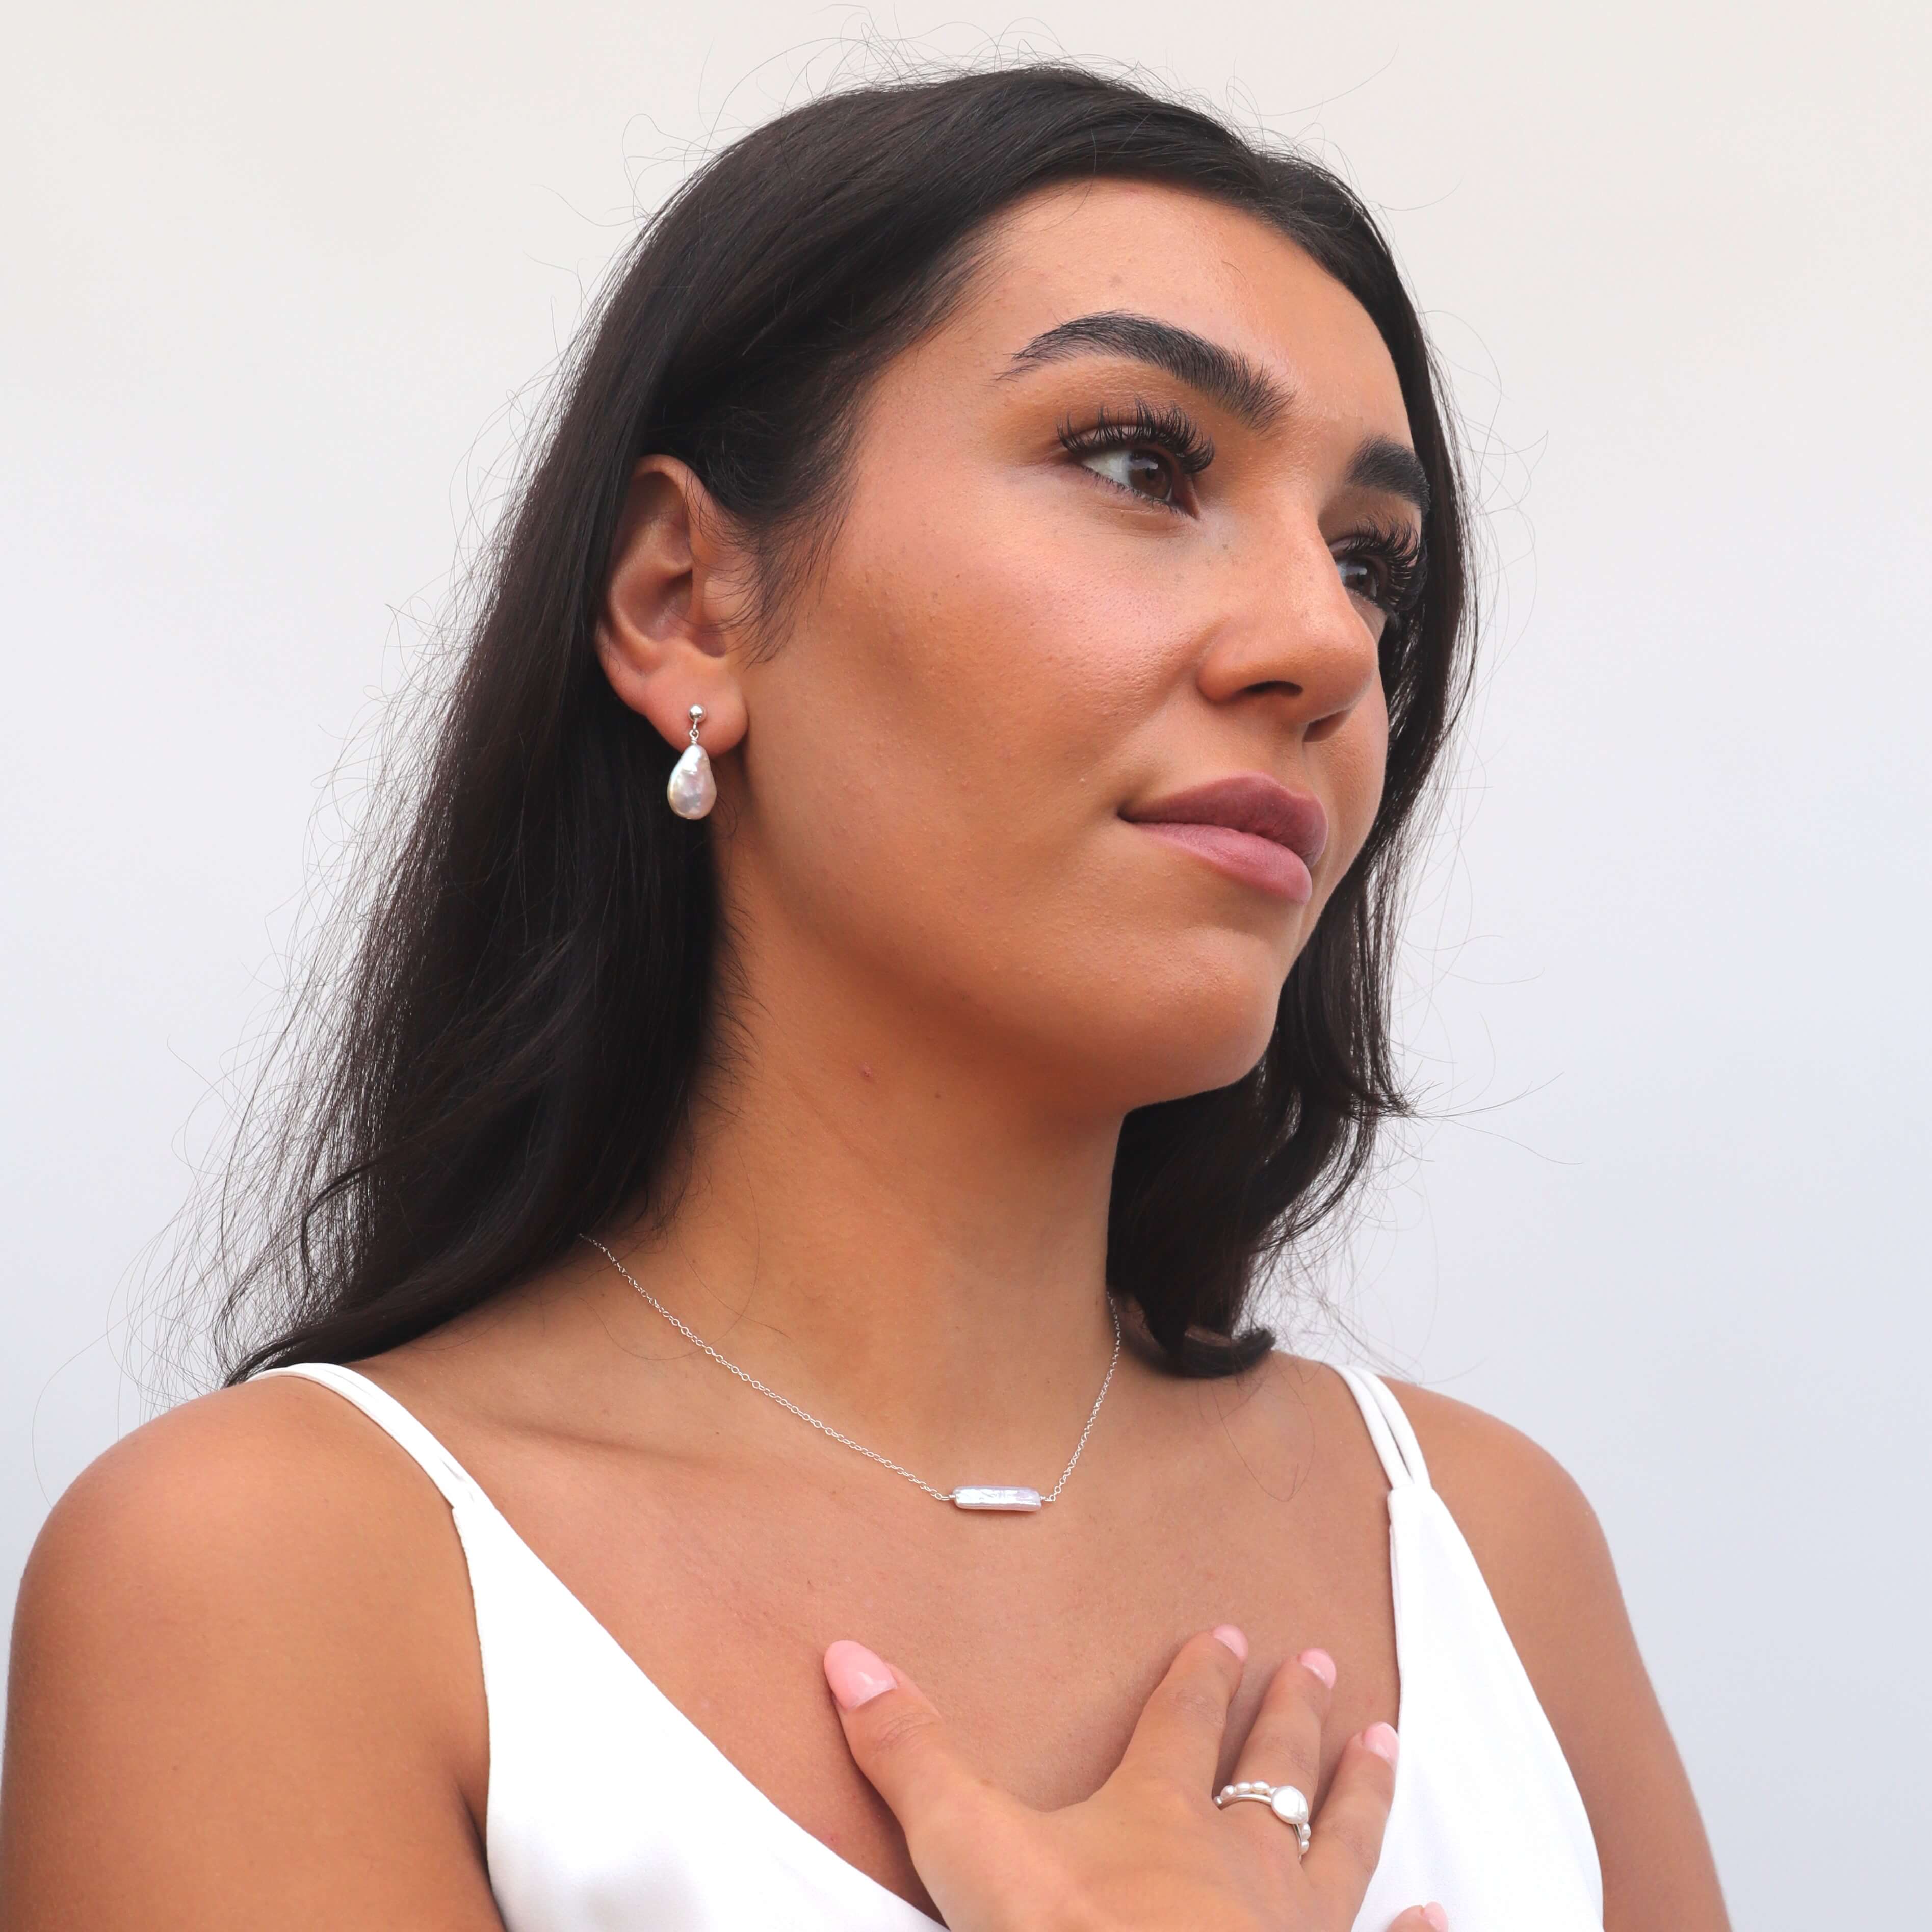 Model wearing white top rectangular pearl necklace and baroque pearl earrings